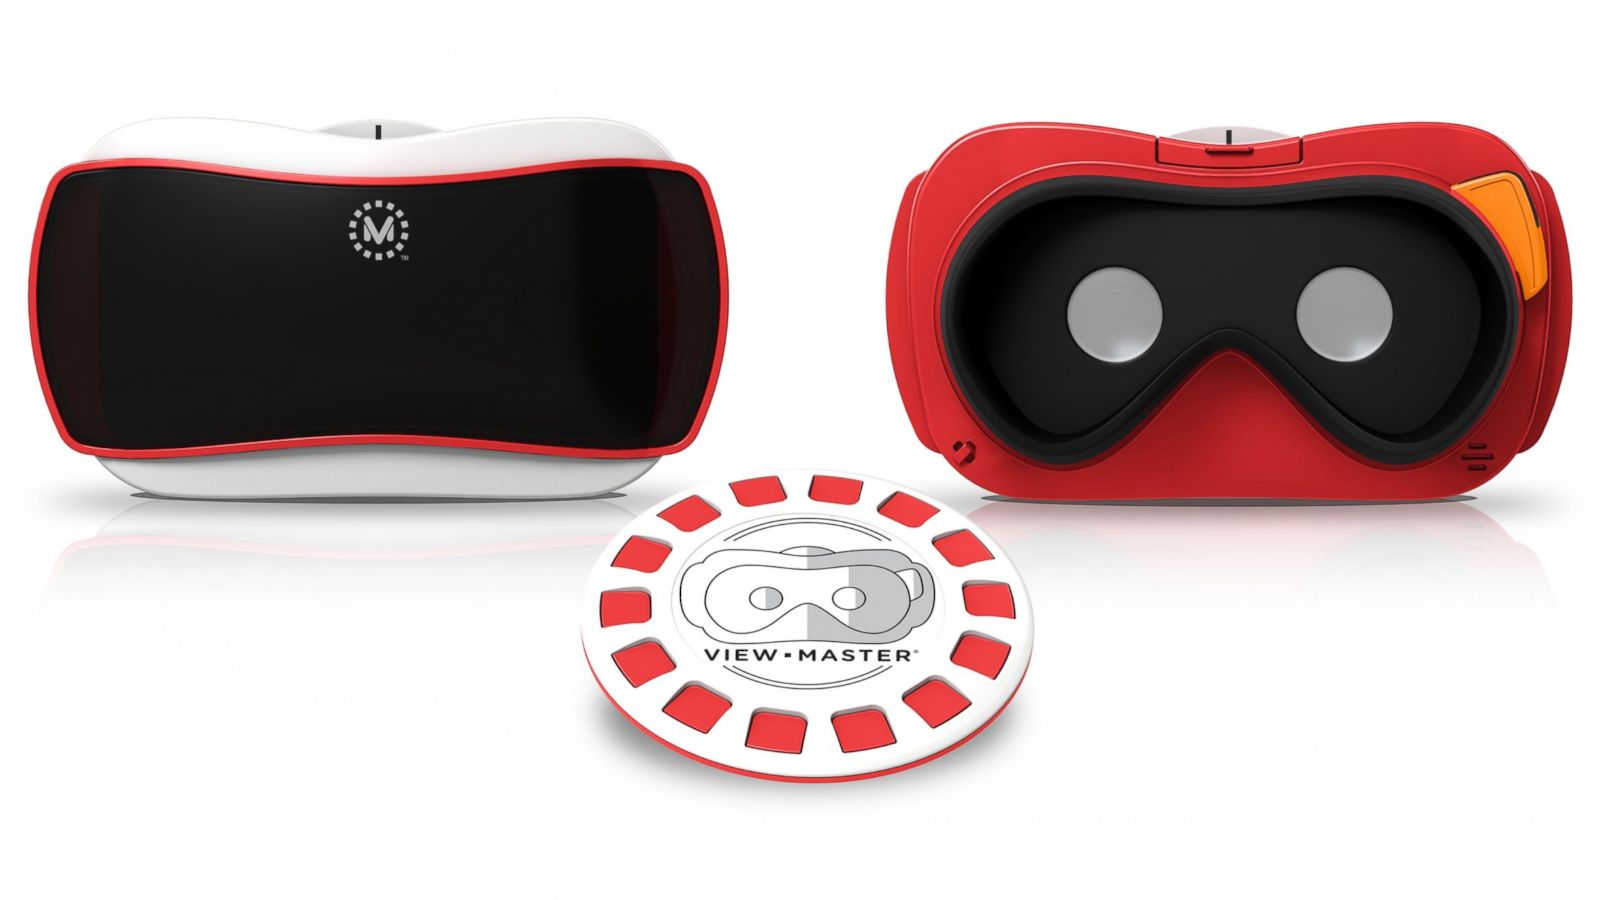 Classic 3D photo viewer the View-Master brought back to life using VR